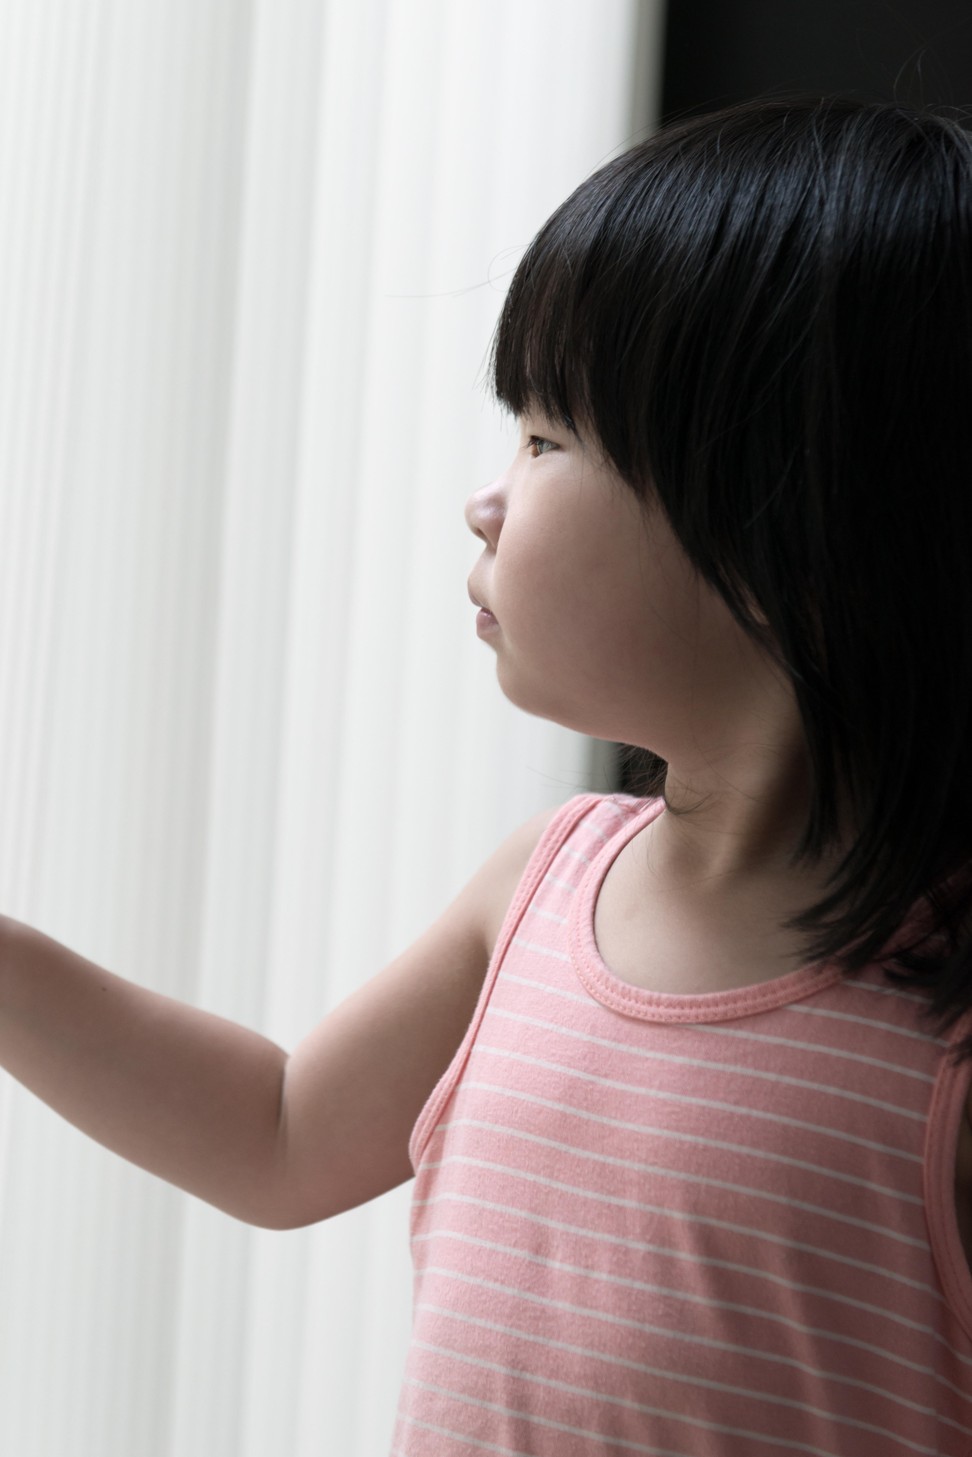 Parents should encourage their children to express their feelings. Photo: Alamy